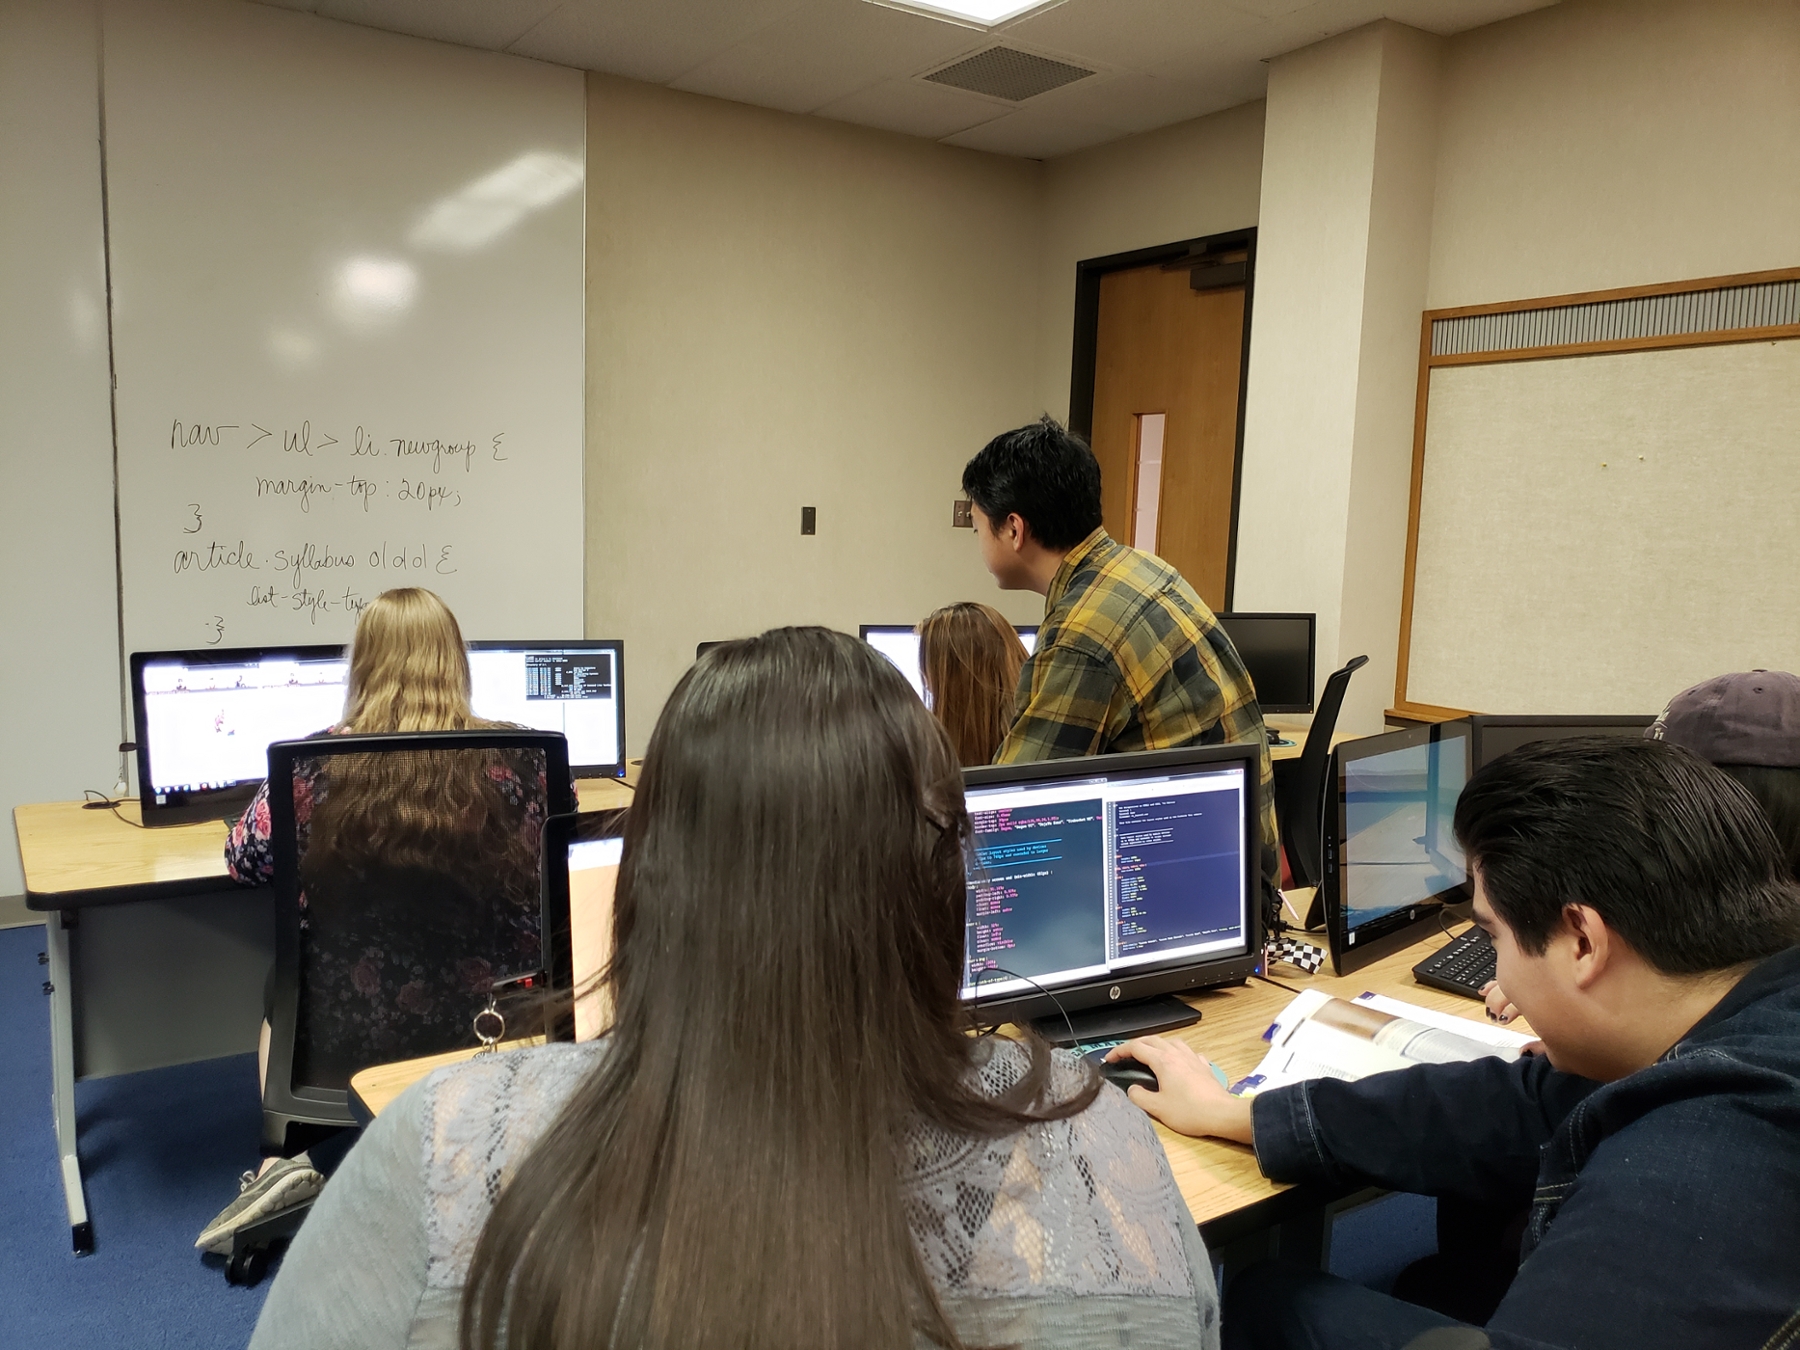 Students working in groups on computers.